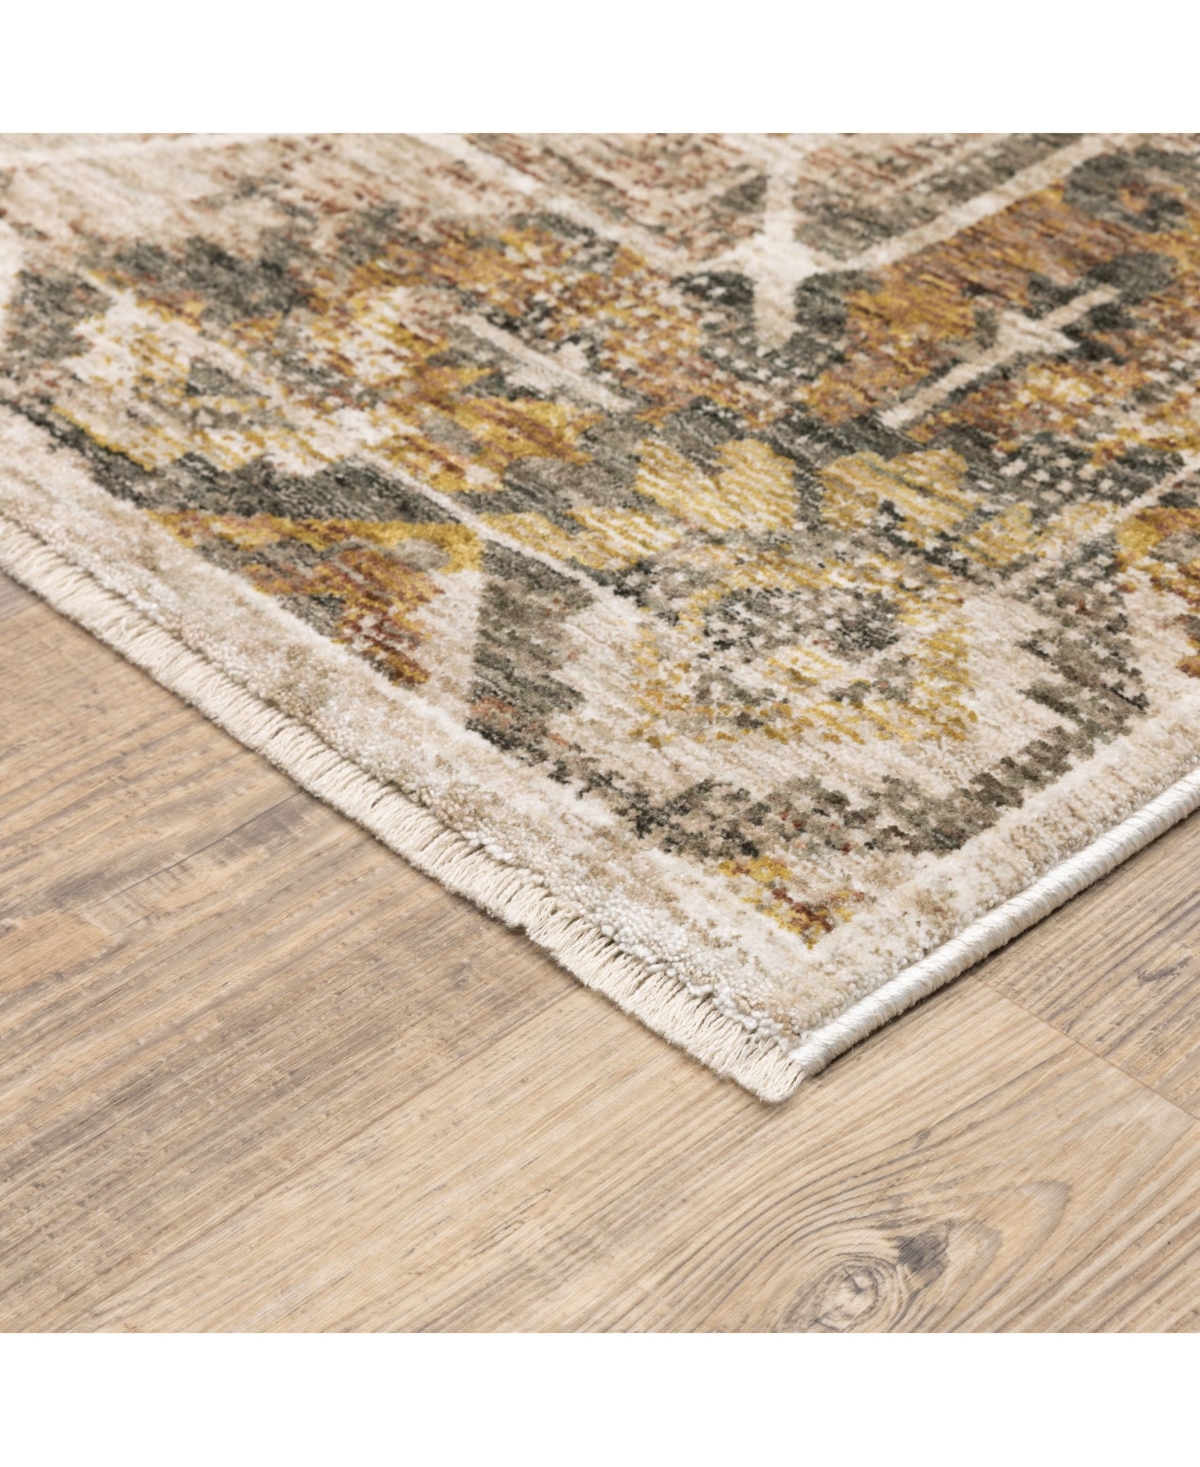 Shop Jhb Design S Kumar Kum11 Gold And Ivory 3'3" X 5' Area Rug In Gold,ivory